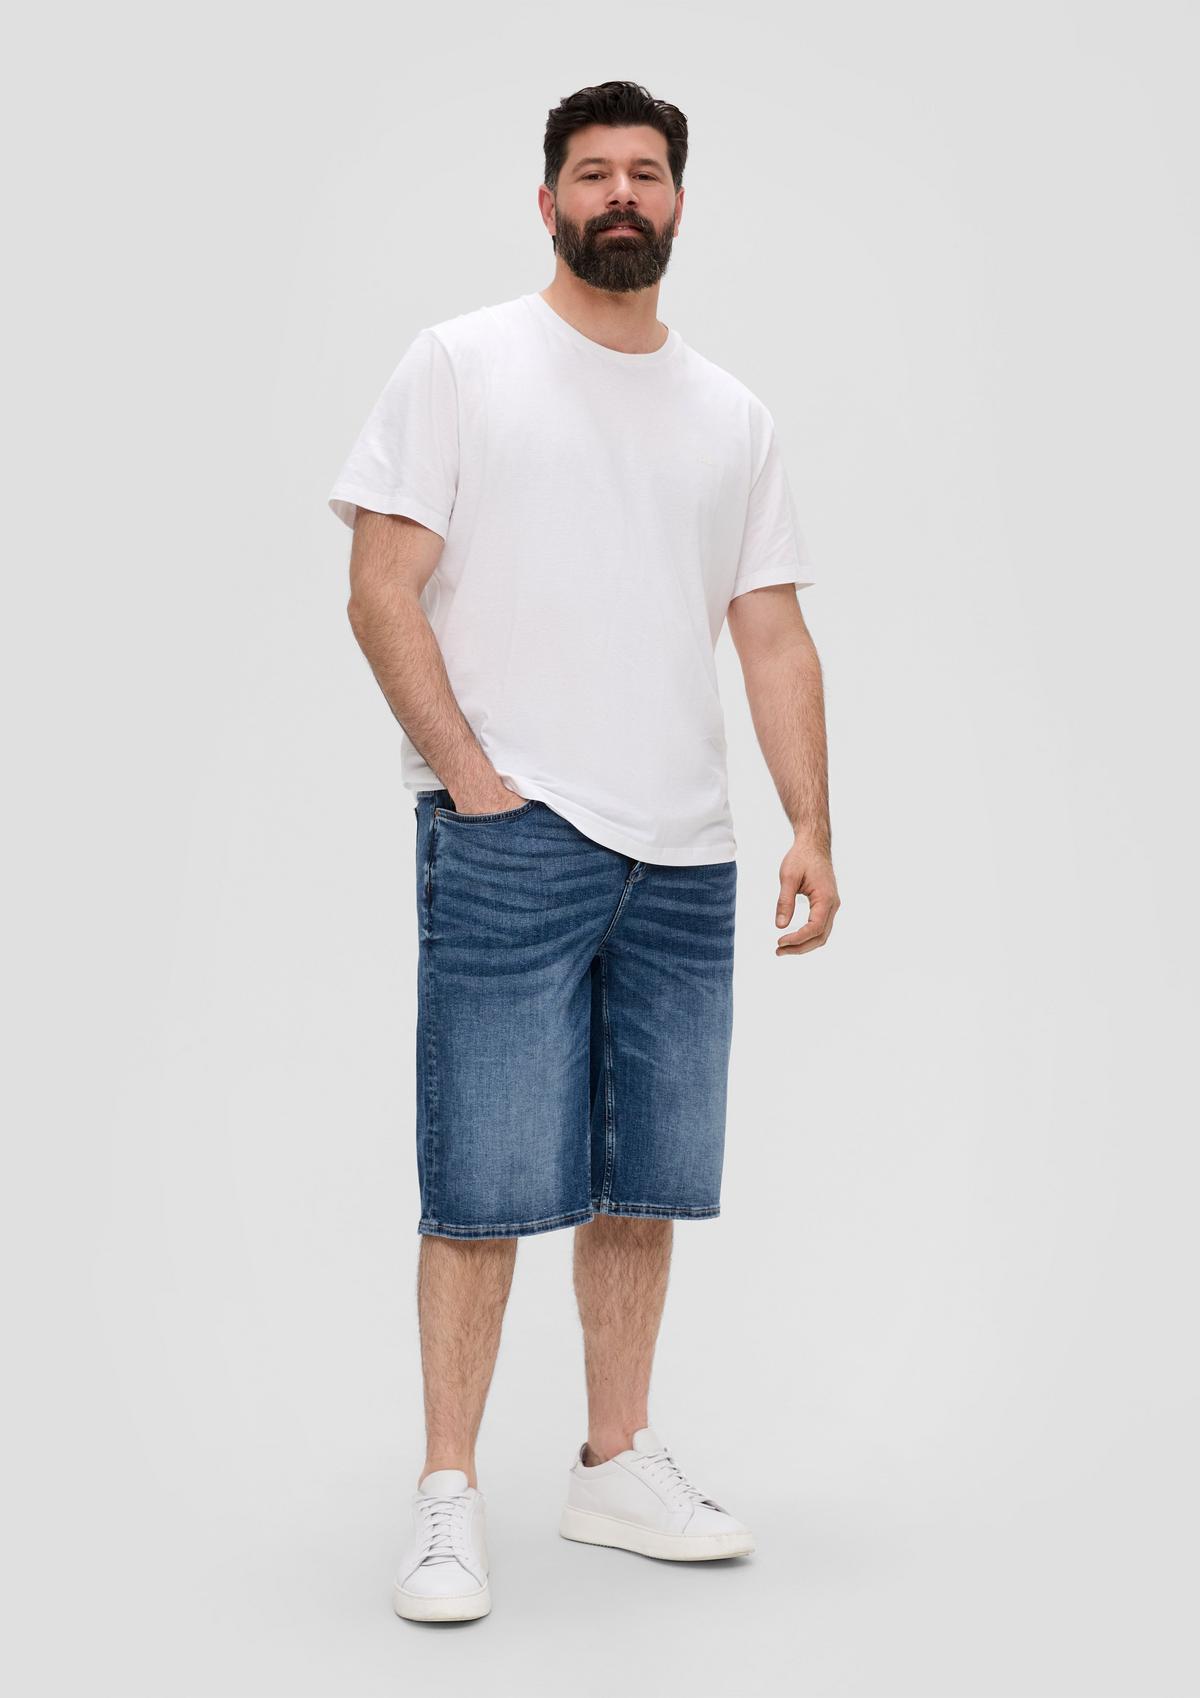 Jeans-Shorts / Relaxed Fit / High Rise / Straight Leg